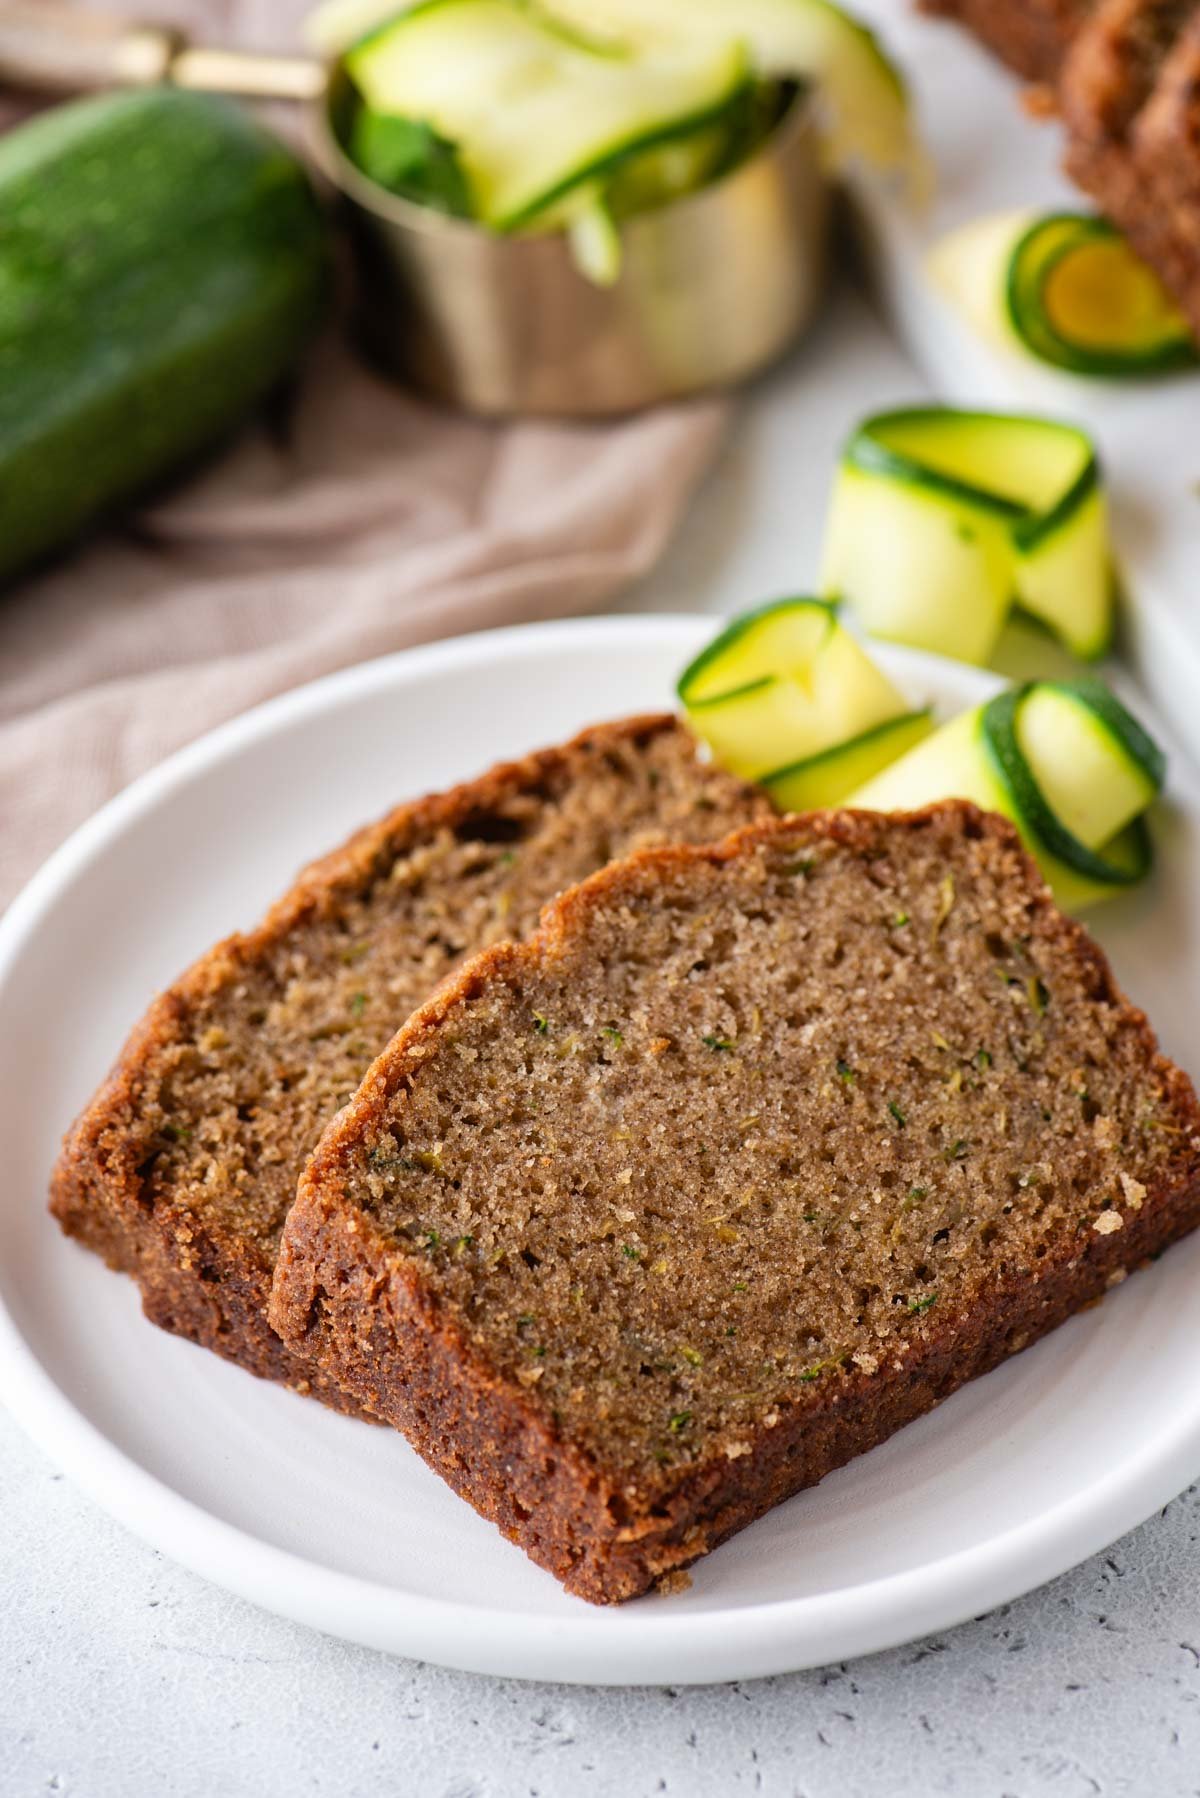 two slices of zucchini bread on a white plate with slices of fresh zucchini and whole zucchini around it